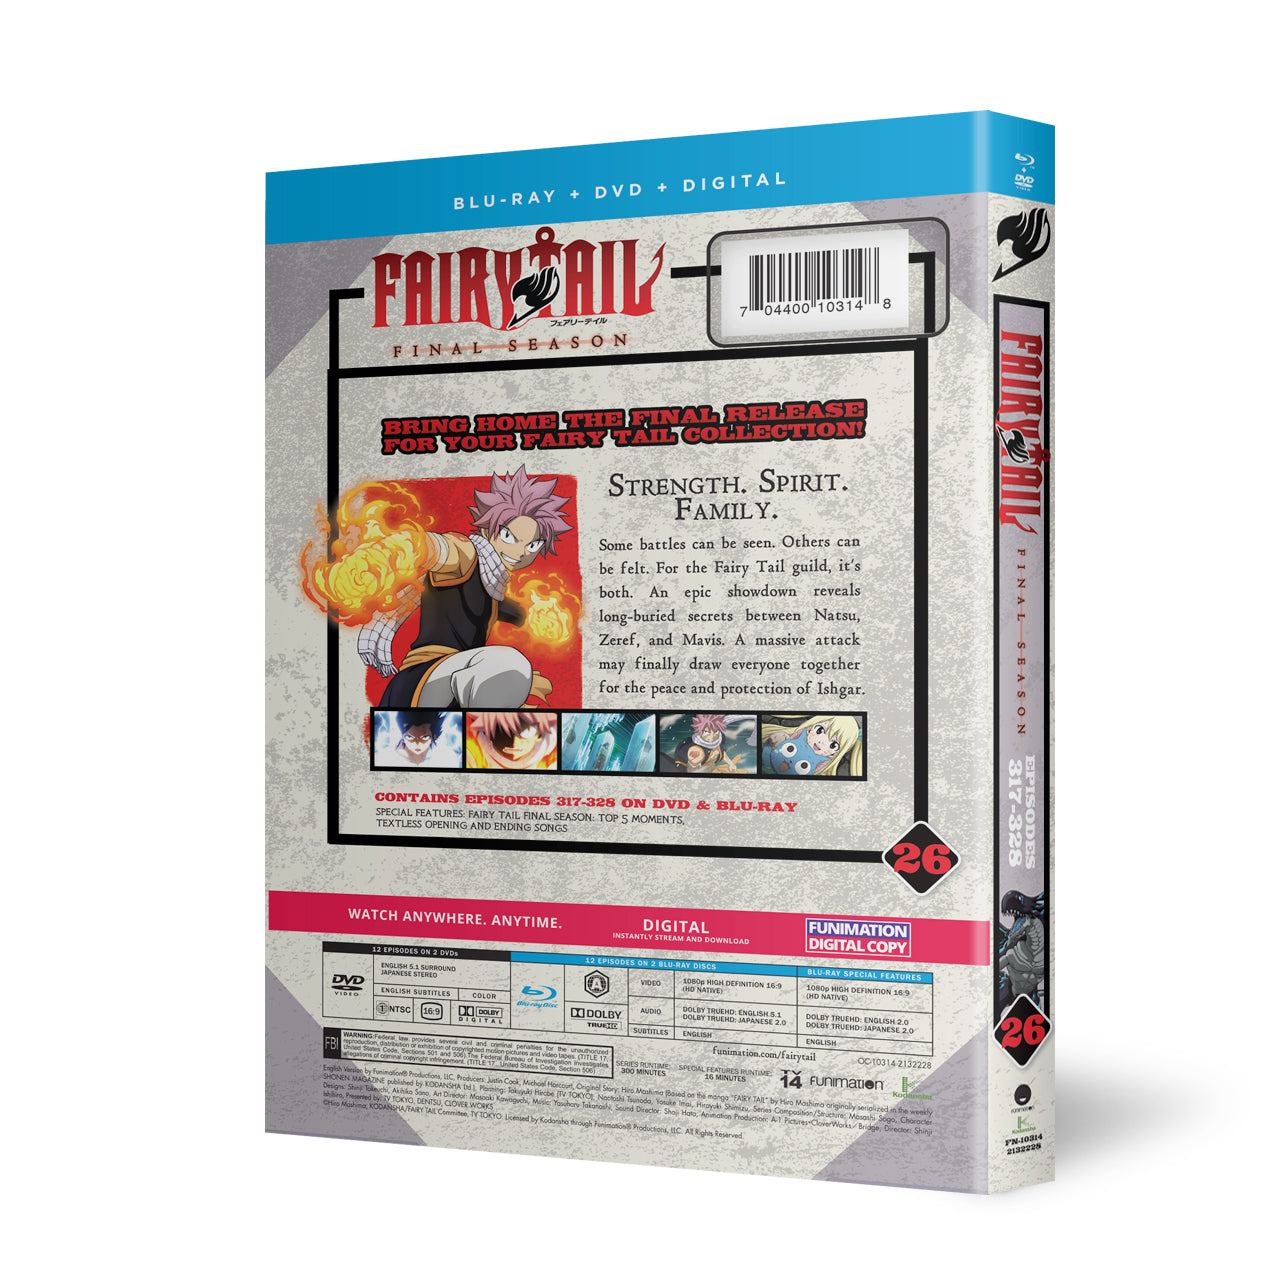 Fairy Tail Final Season - Part 26 - Blu-ray + DVD image count 3